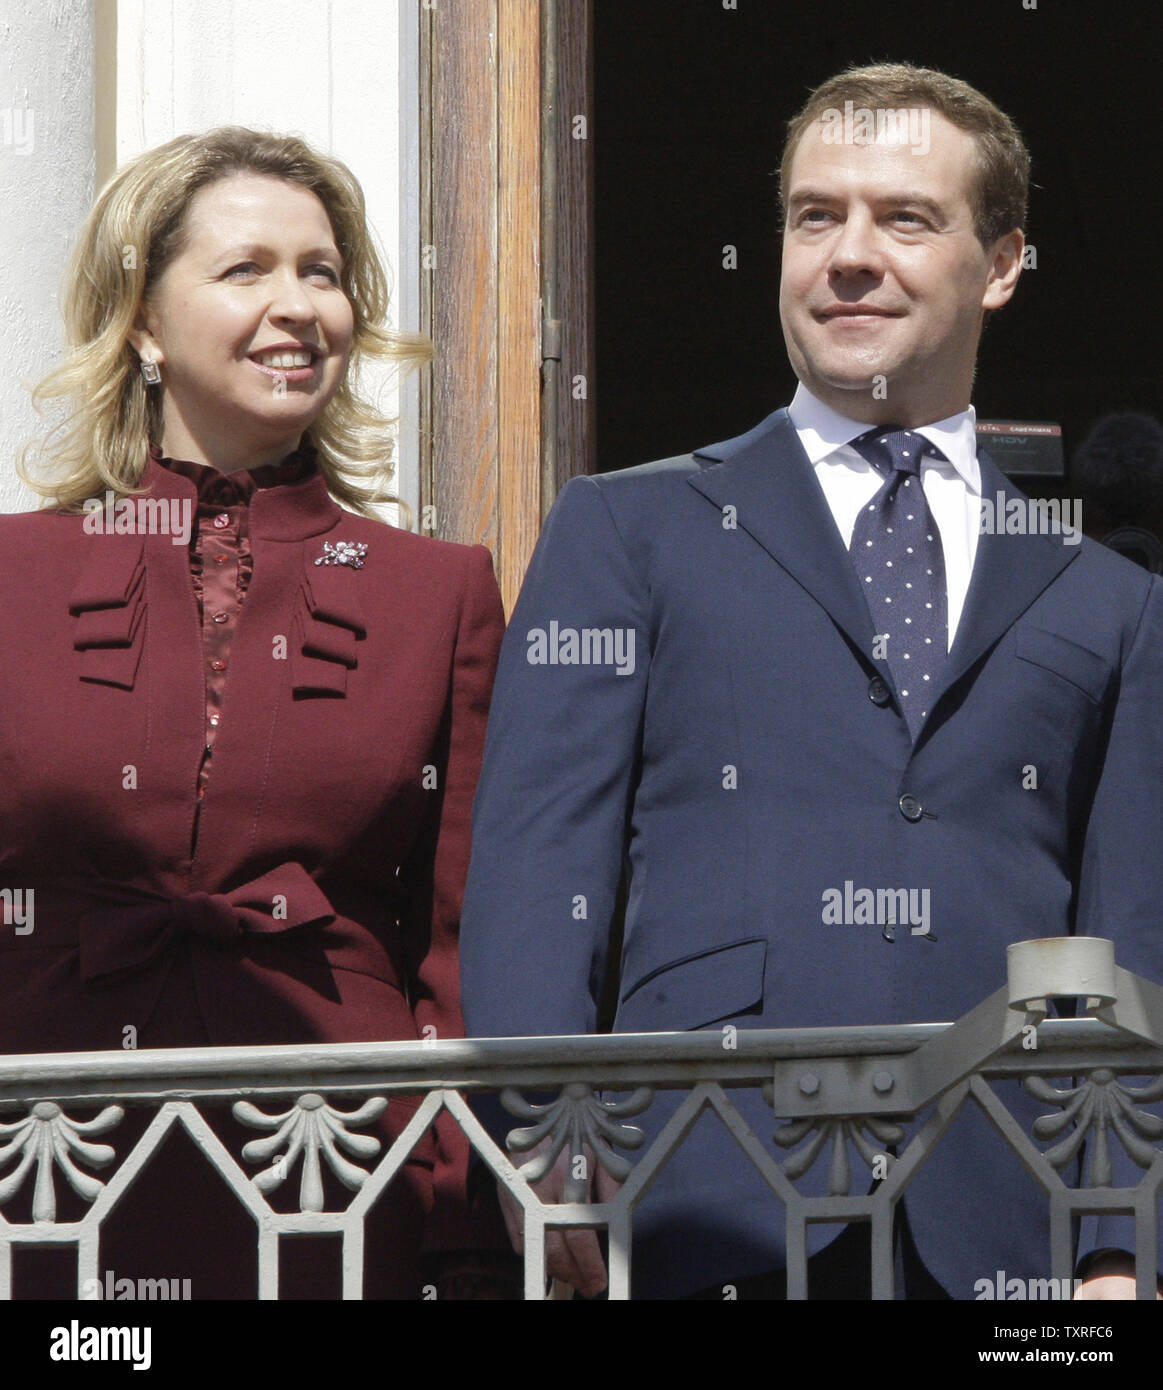 Russian President Dmitry Medvedev With His Wife Svetlana Stands On A Balcony Of The Presidential Palace In Helsinki On April 20 2009 At The First Days Of His Two Day State Visit To